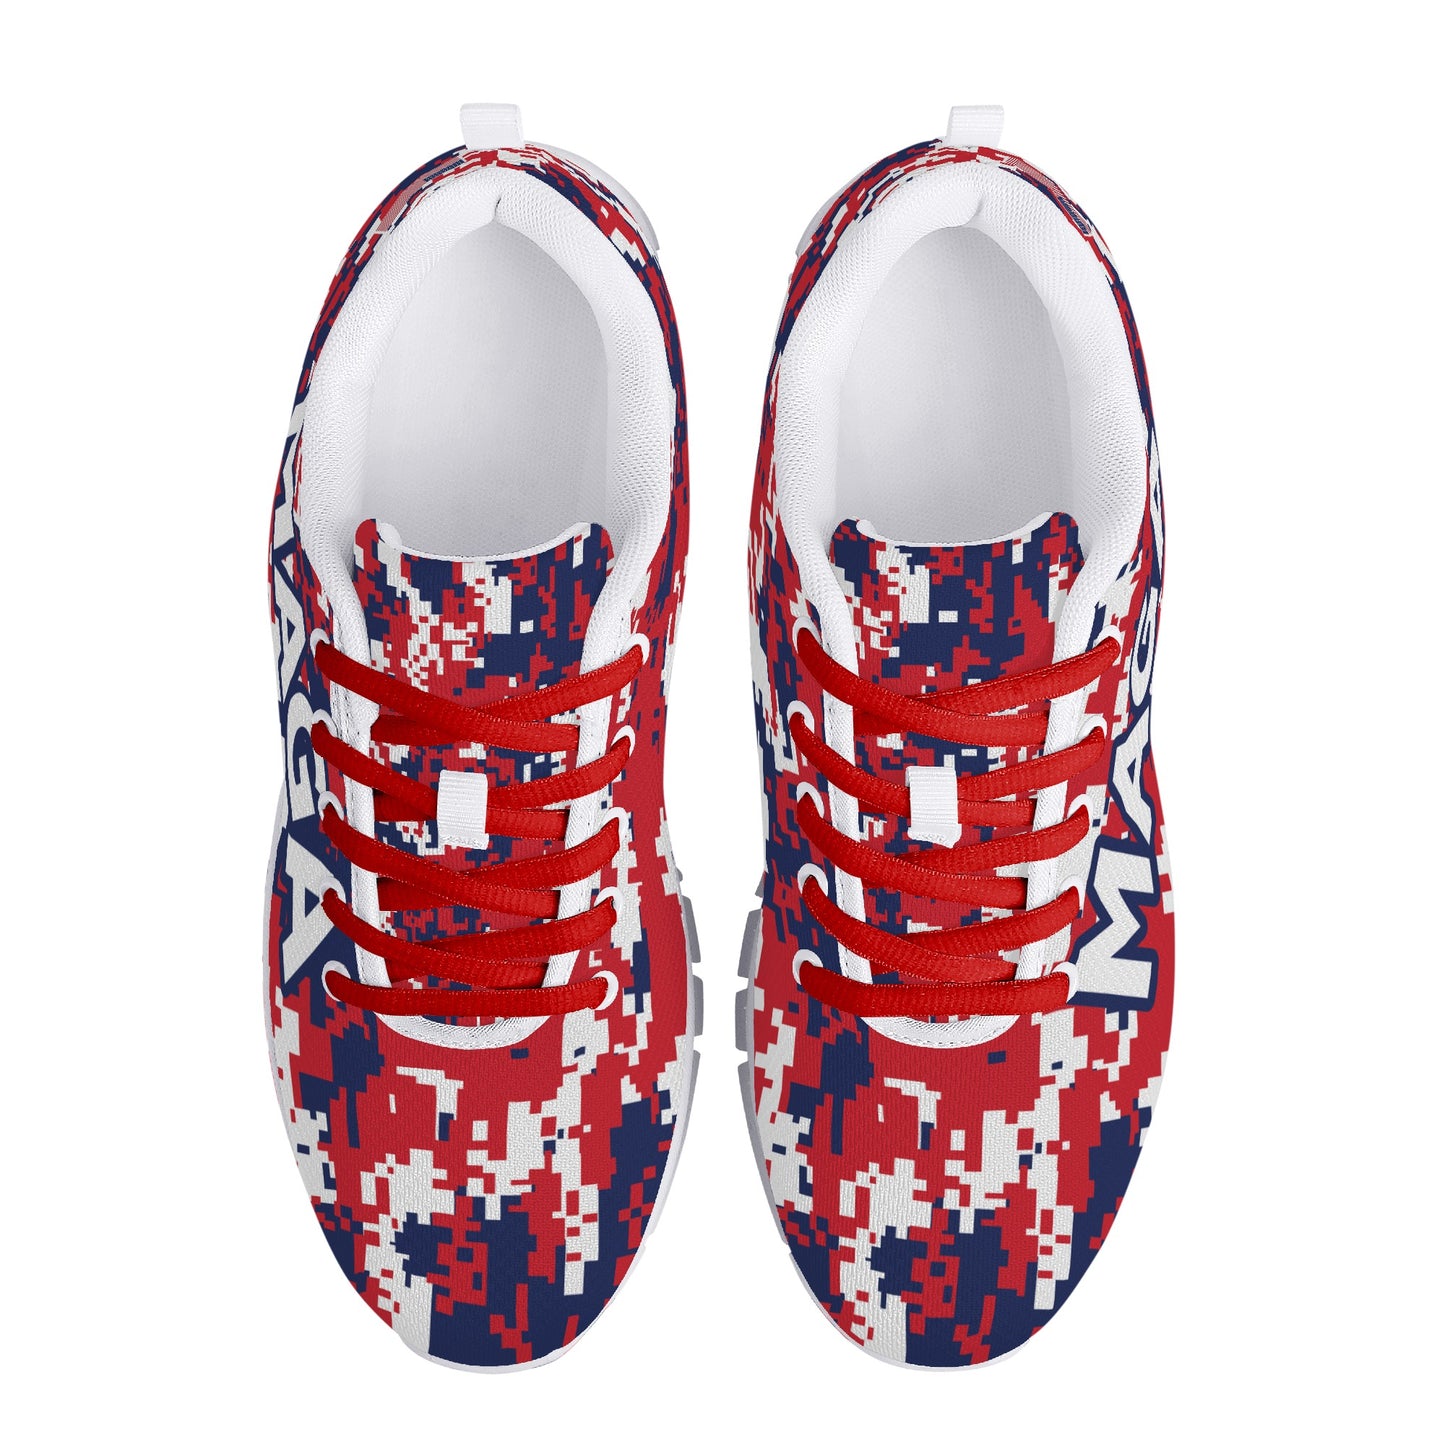 MAGA Red White and Blue Digicam Women's Sneaker